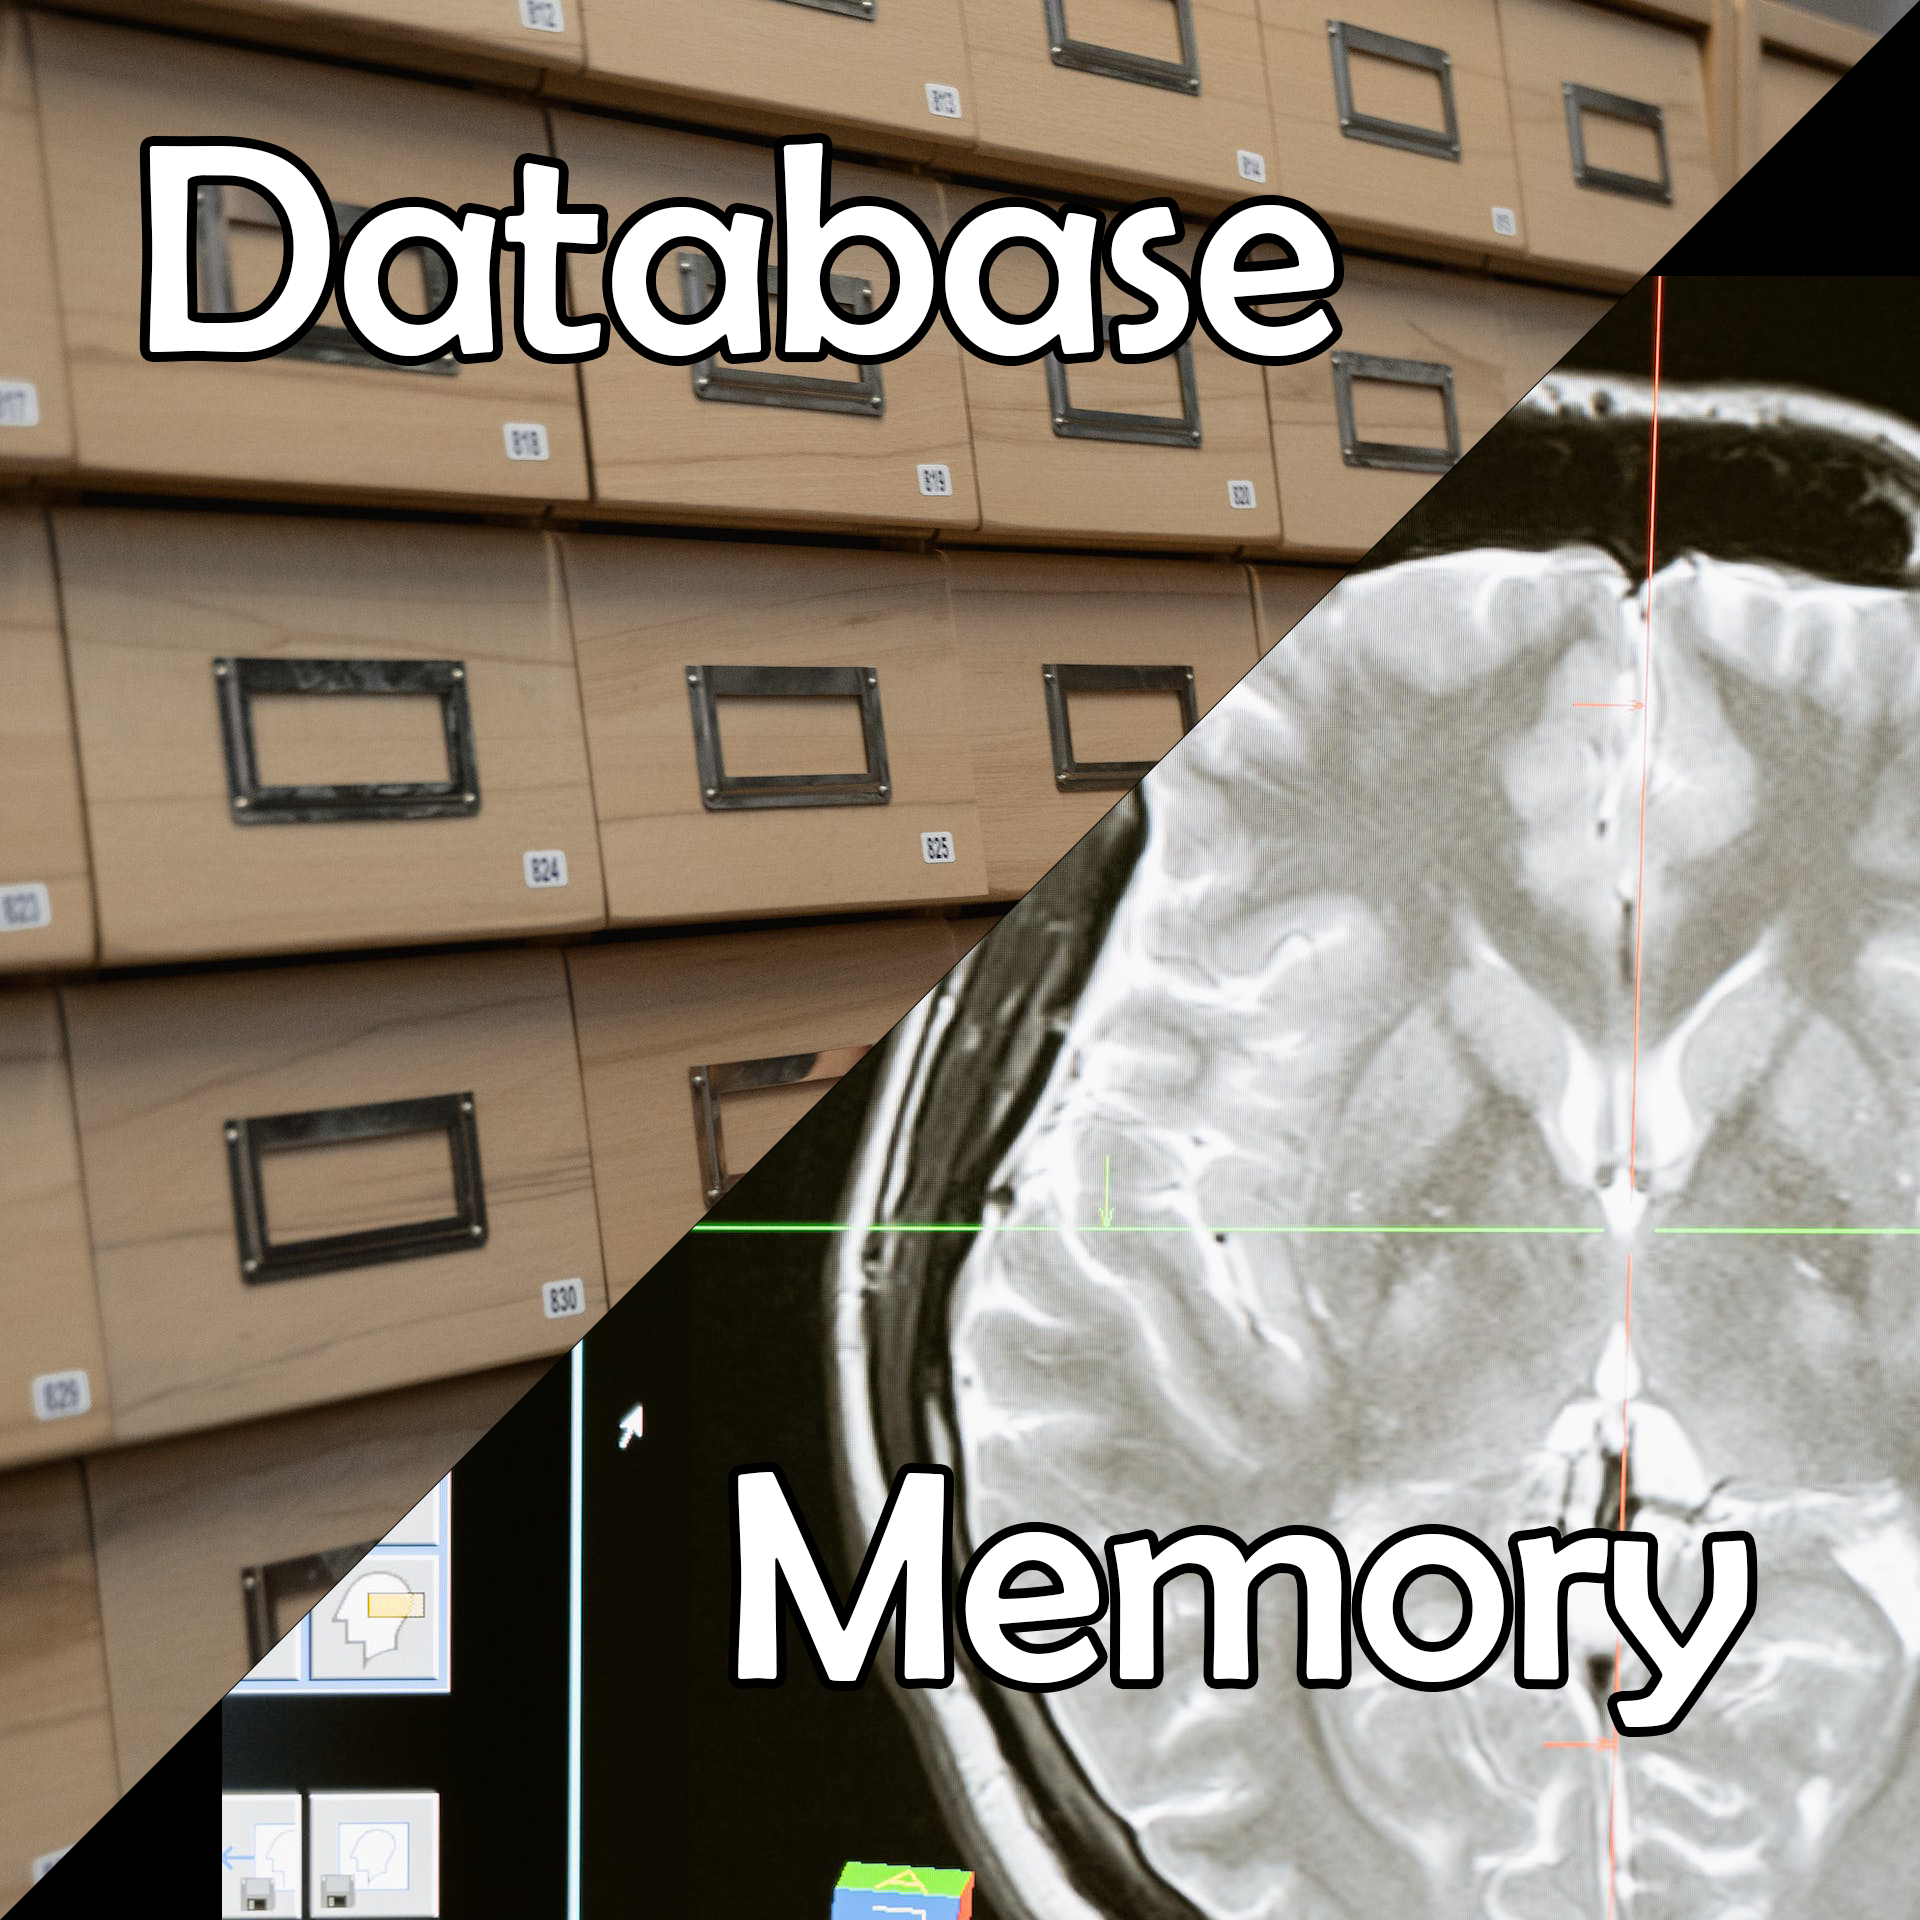 Database is akin to memory